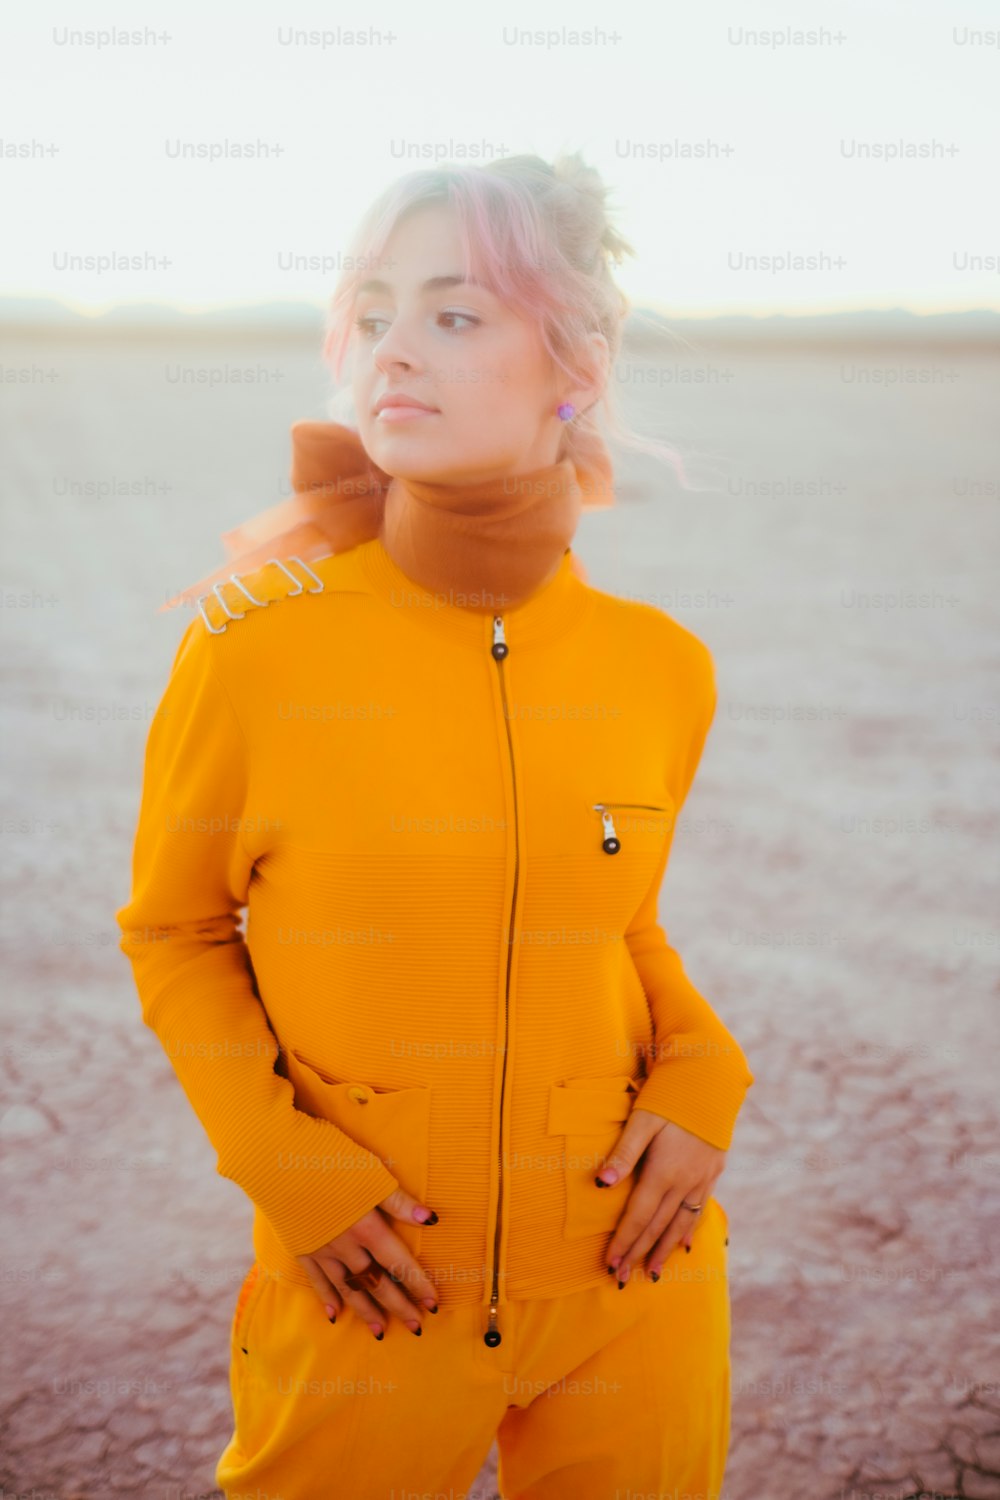 a woman in a yellow suit standing in the desert